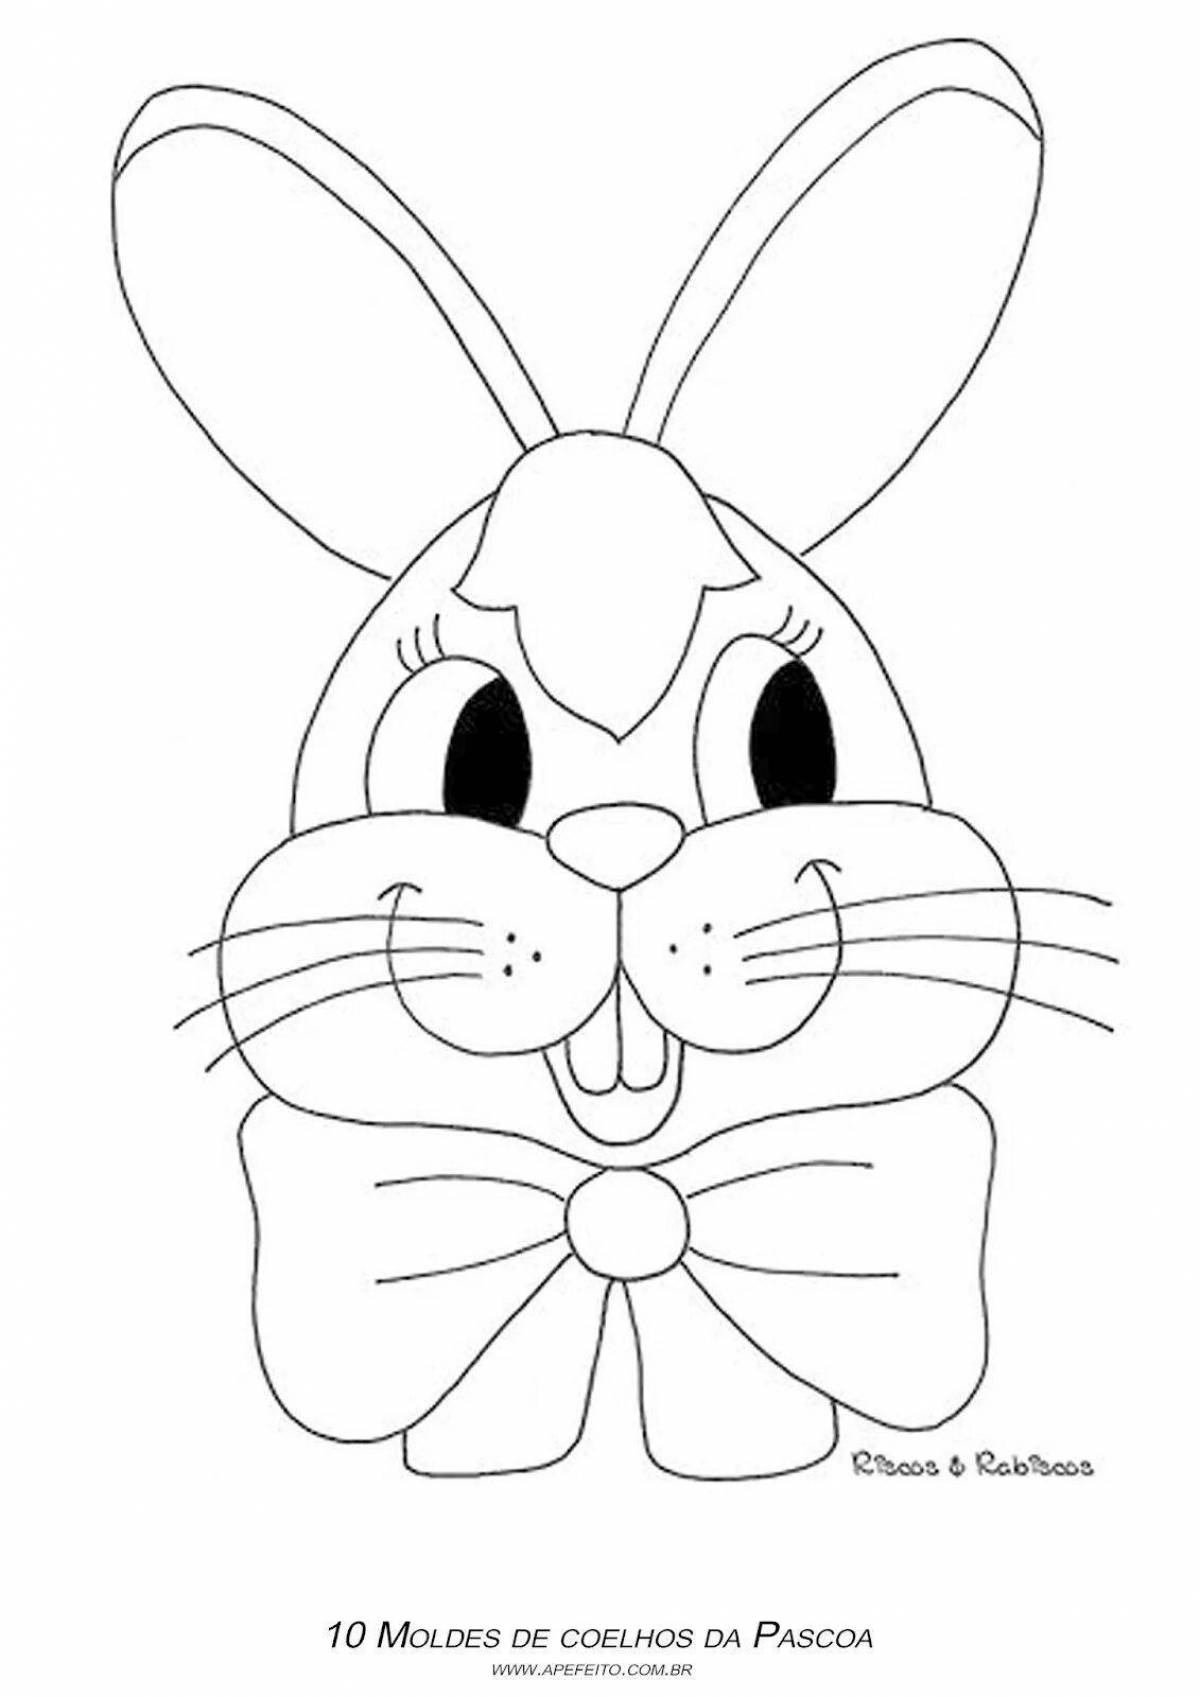 Colorful rabbit face coloring book